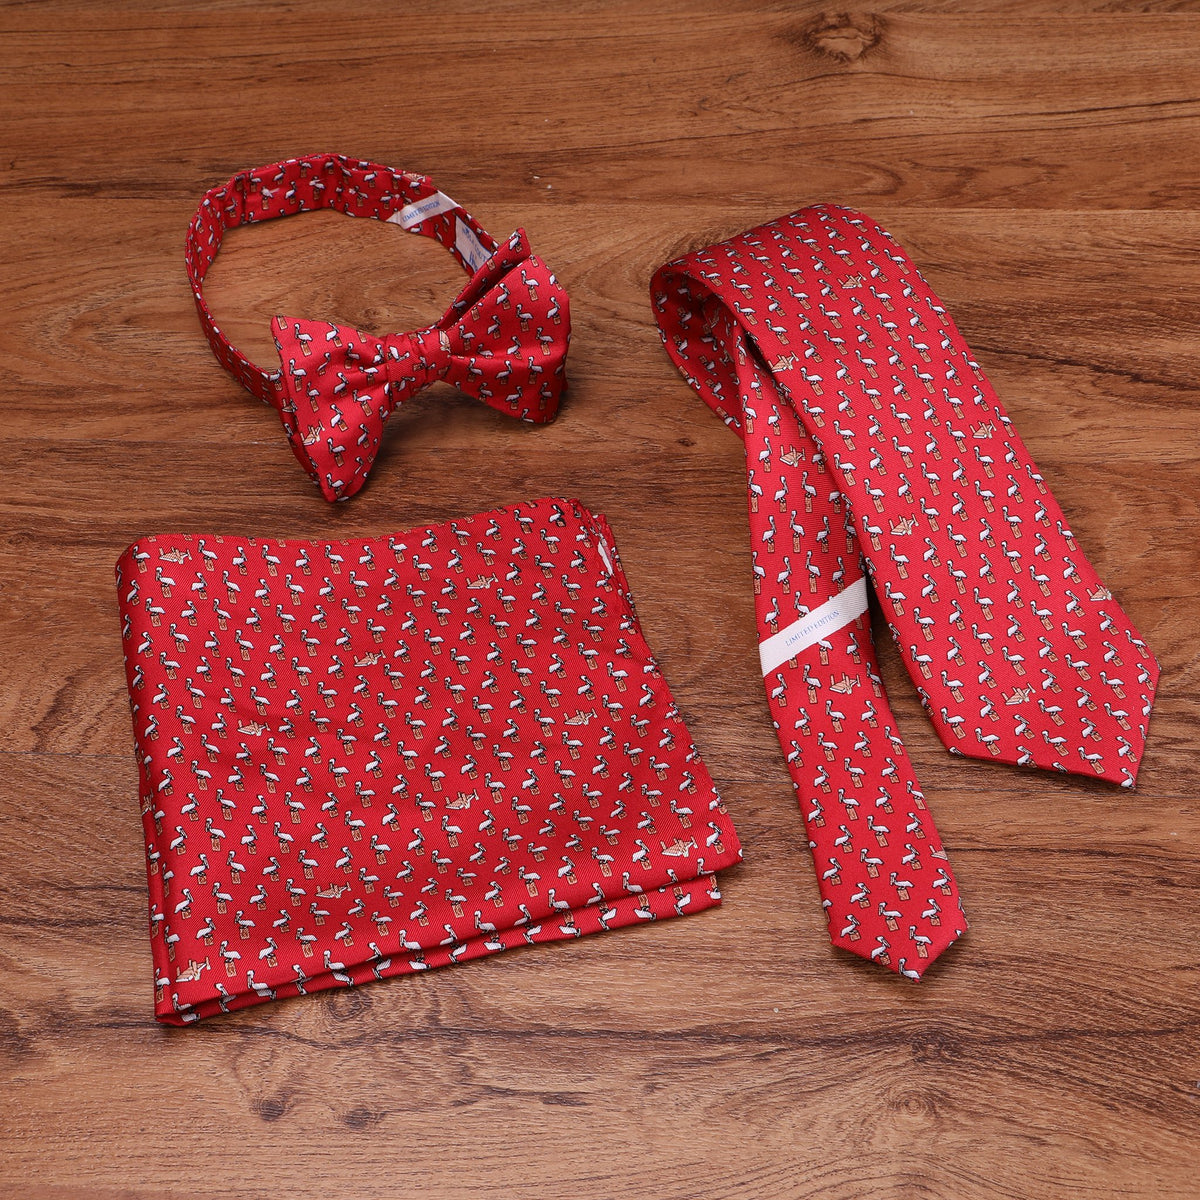 Limited Edition NOLA Couture X Haspel Red Pelican Print Tie - O/S